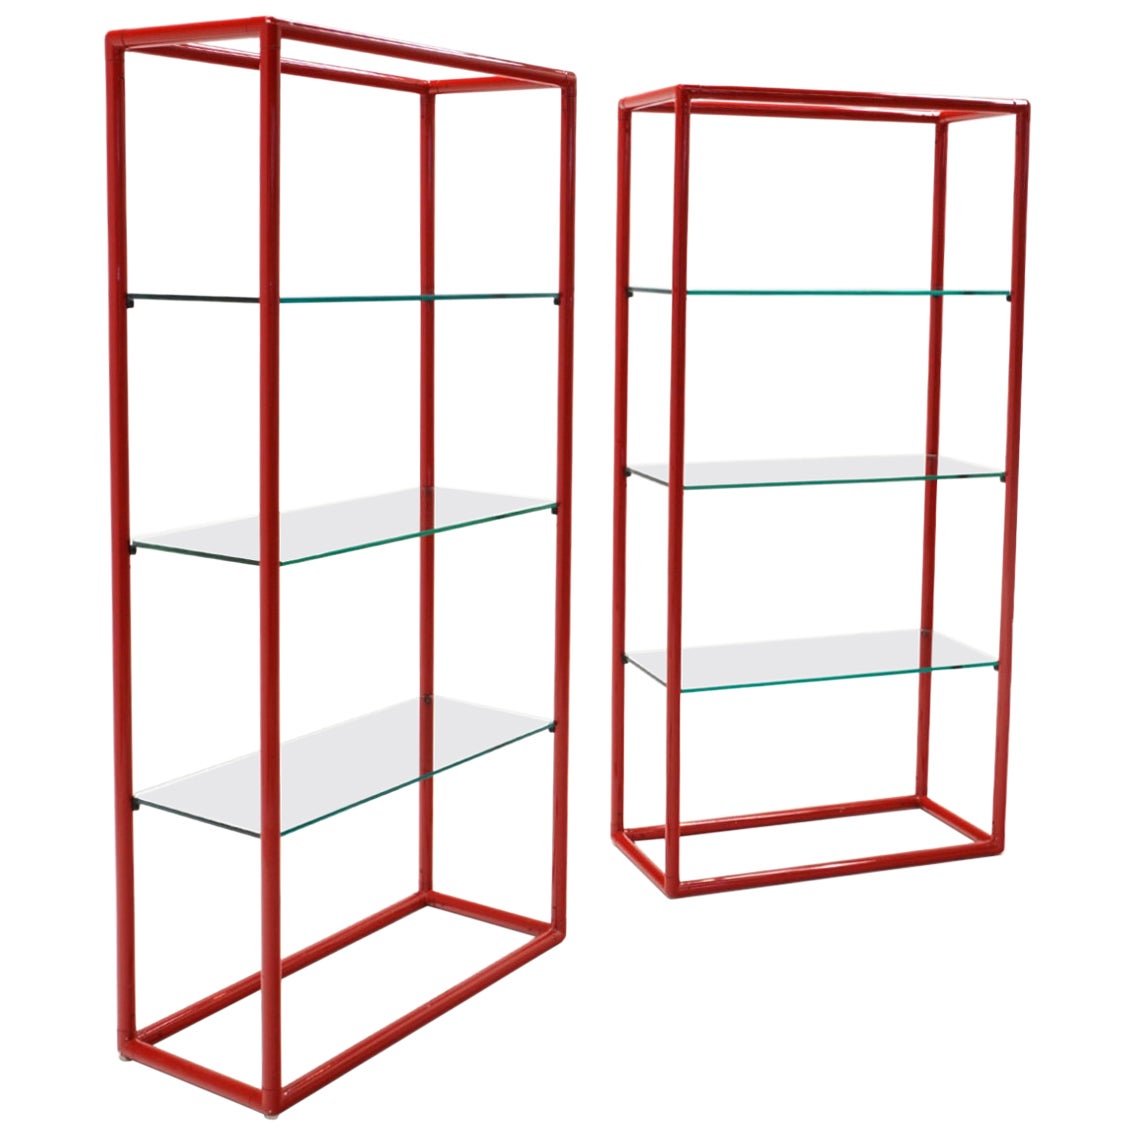 Pair Display Shelves in Red Tubular Enameled Steel Frames with 3/8 Inch Glass